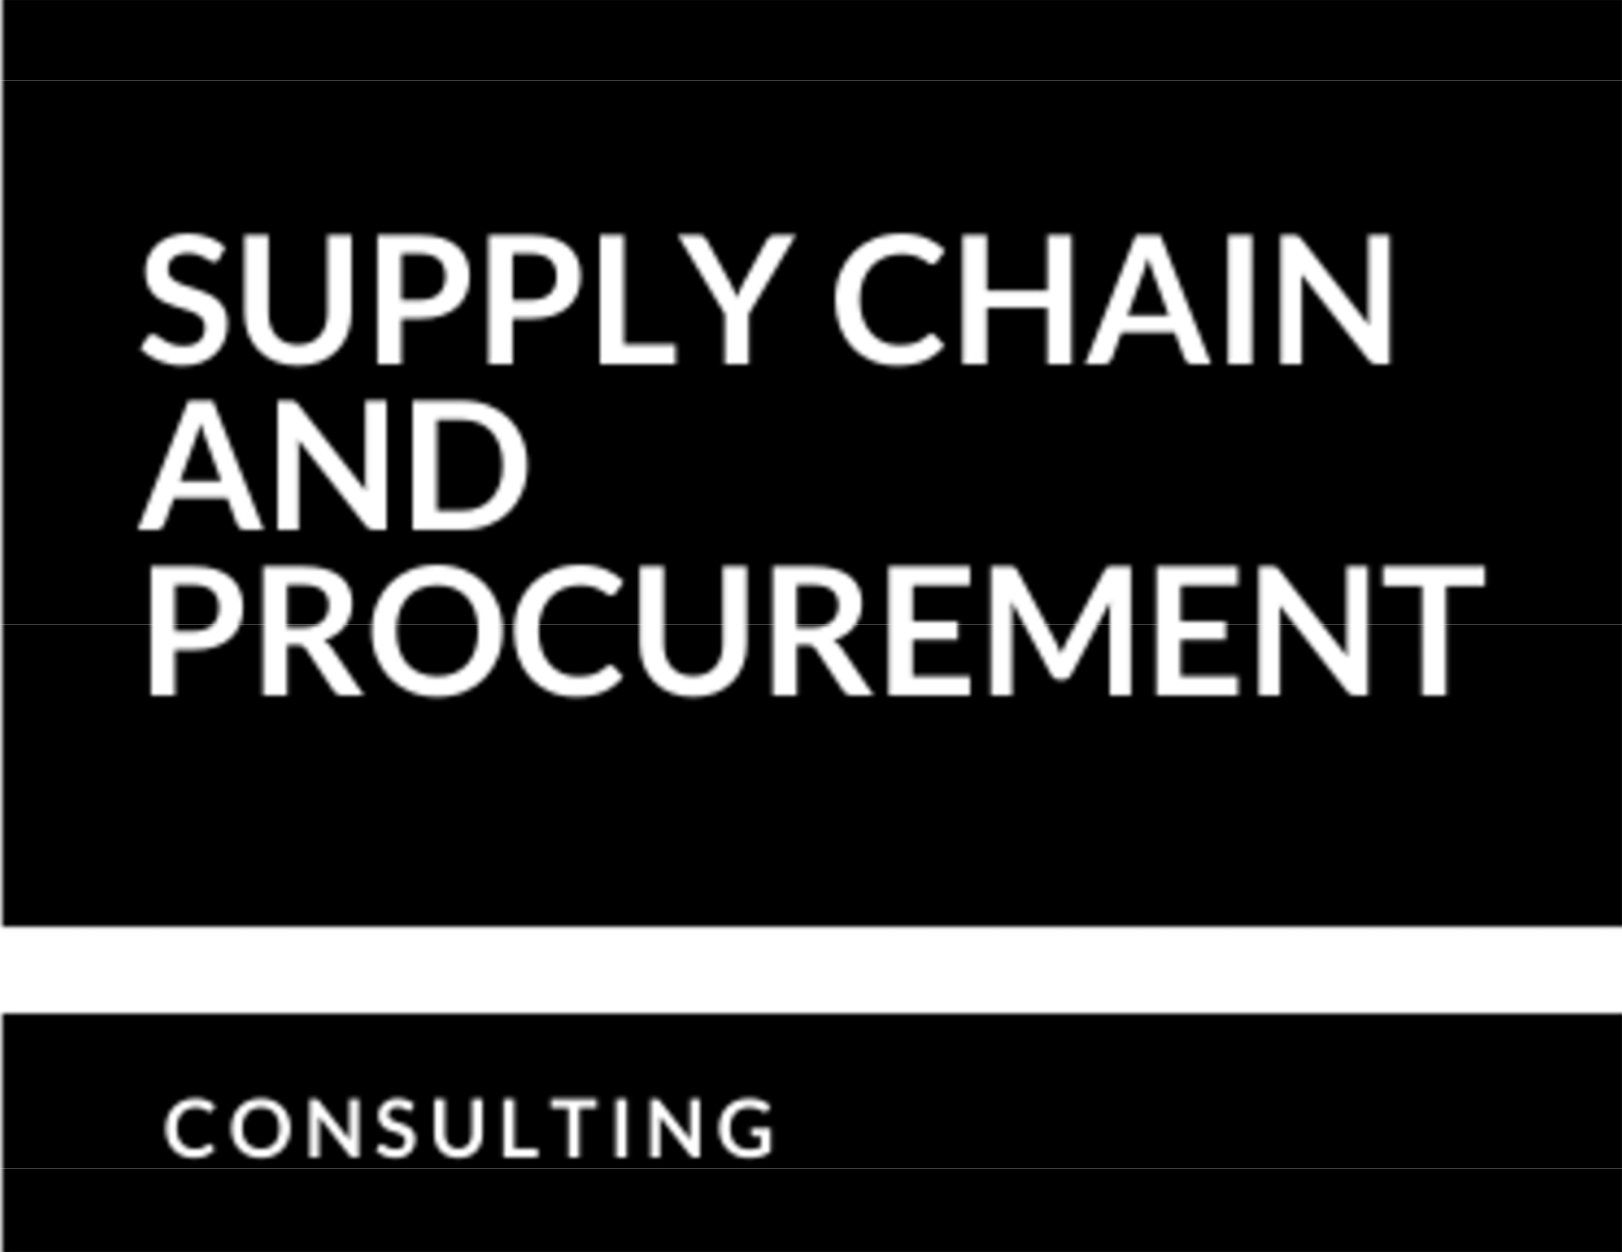 Supply Chain and Procurement Consulting Extend Their Services Across International Borders